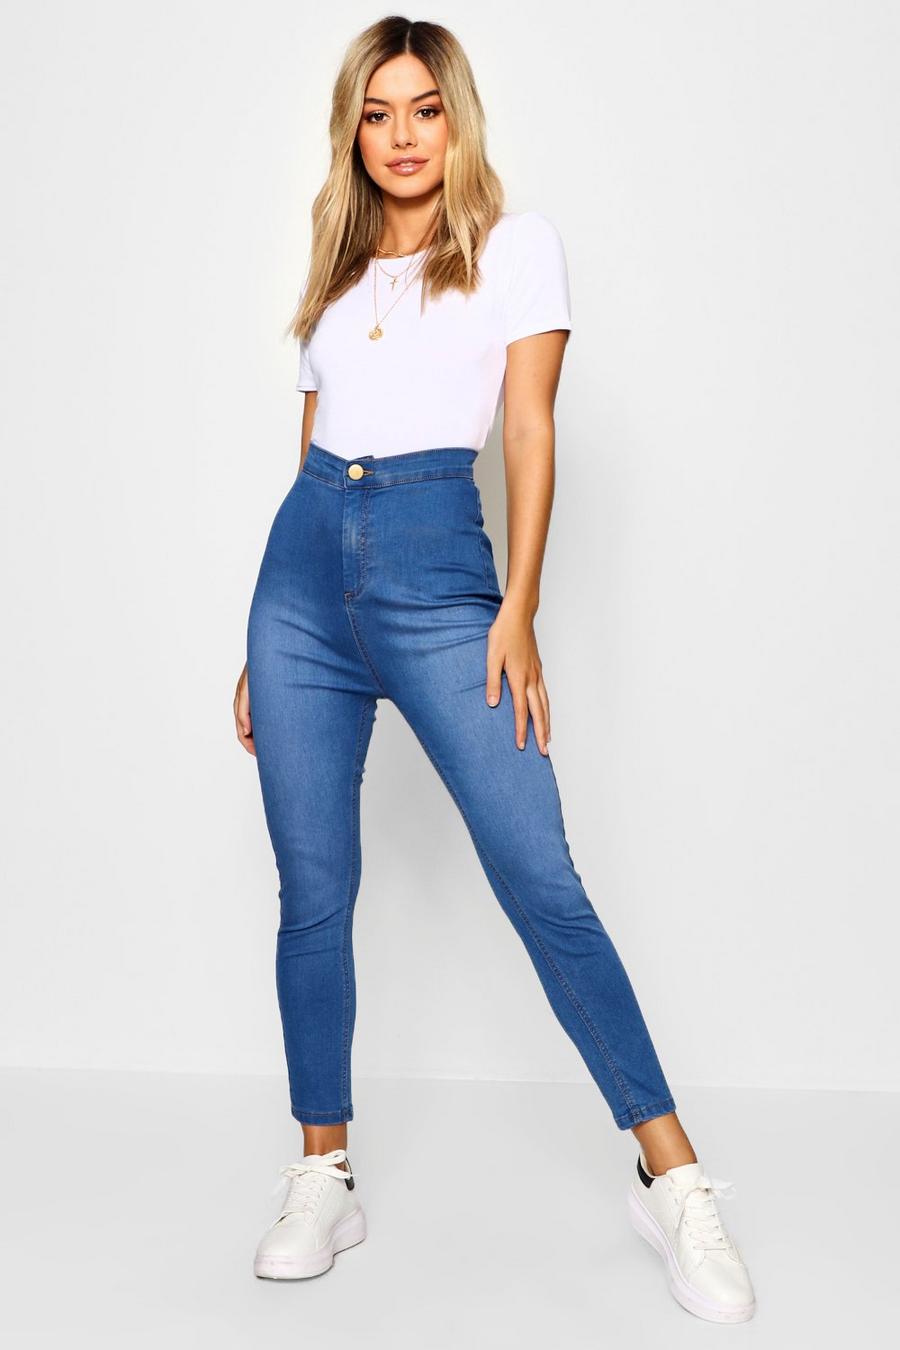 Women high waist one button skinny fit jeans